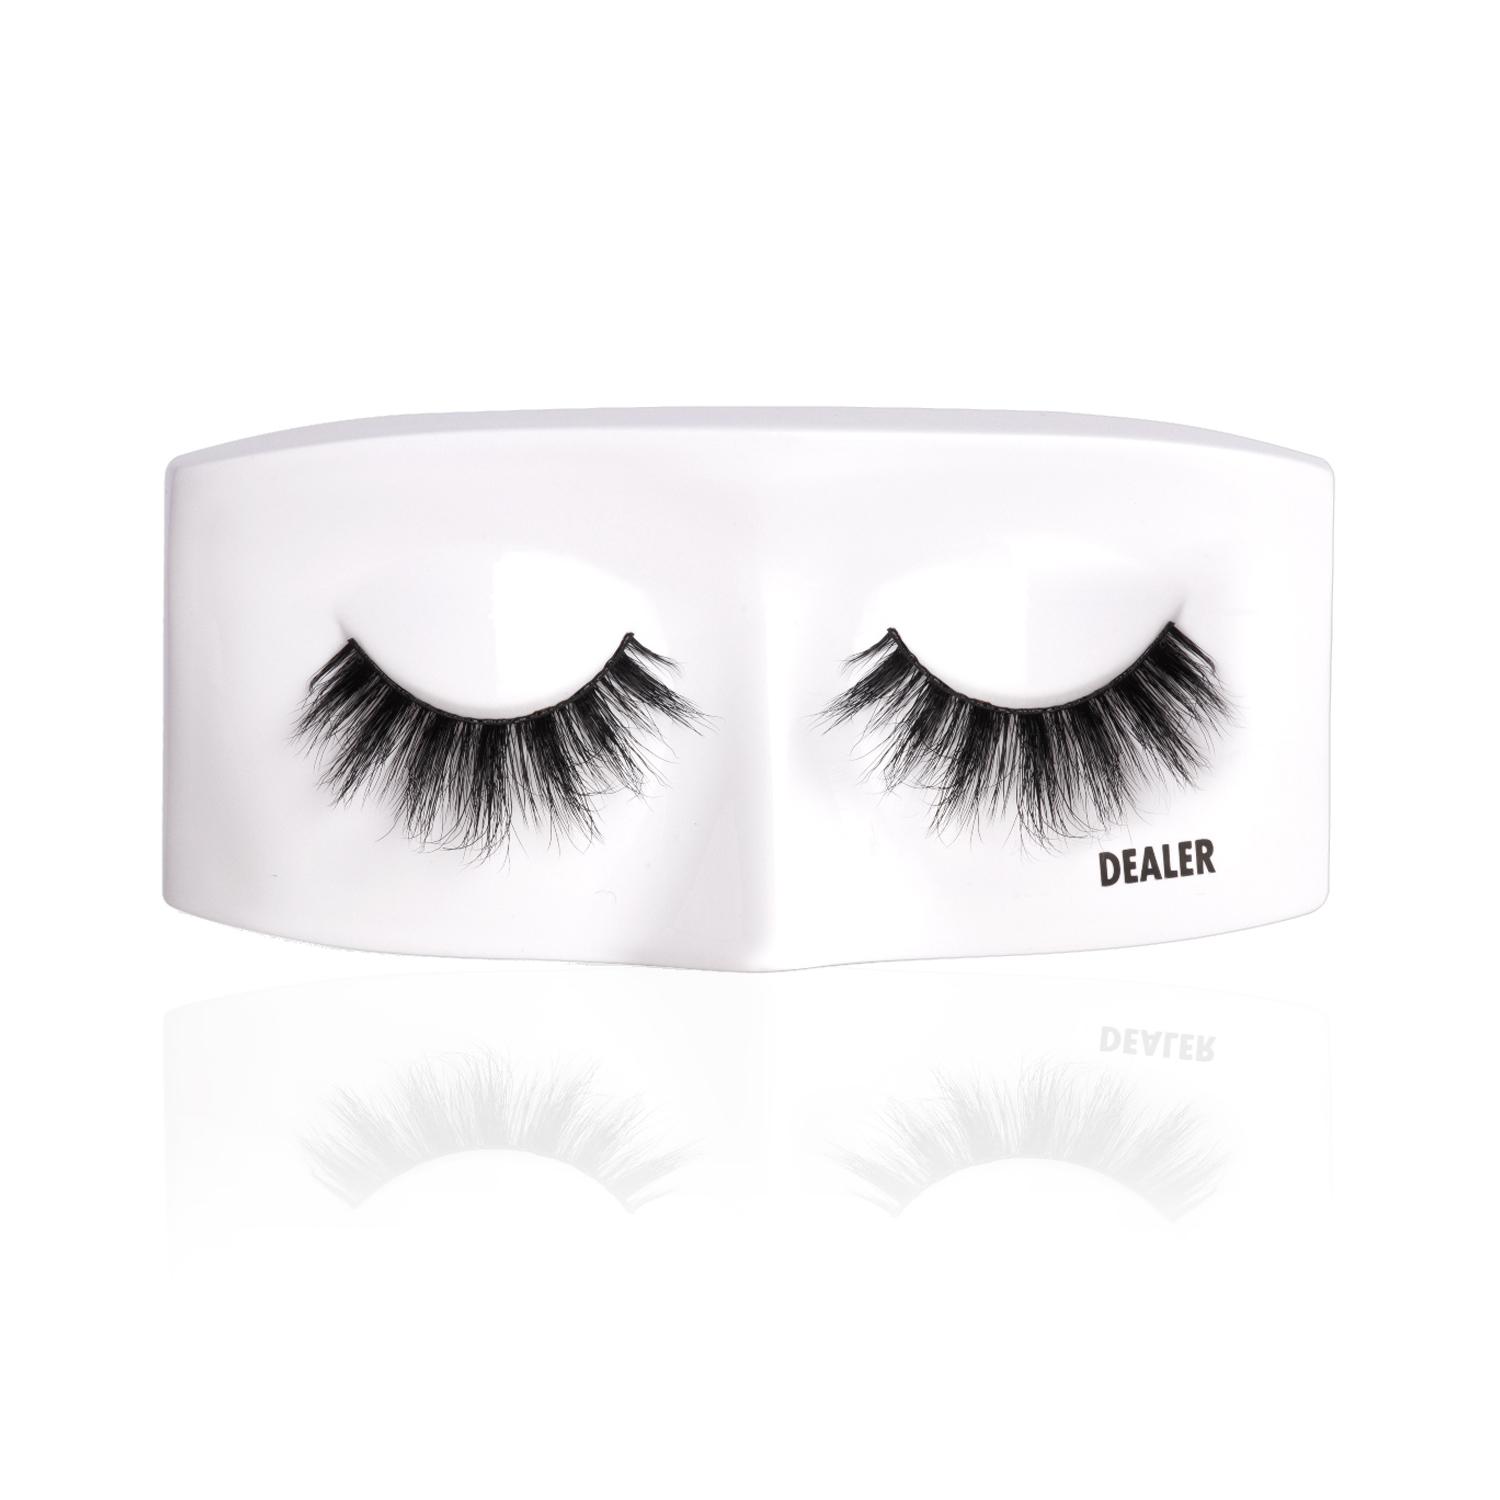 PAC Ace Of Lashes - Dealer (1 Pair)